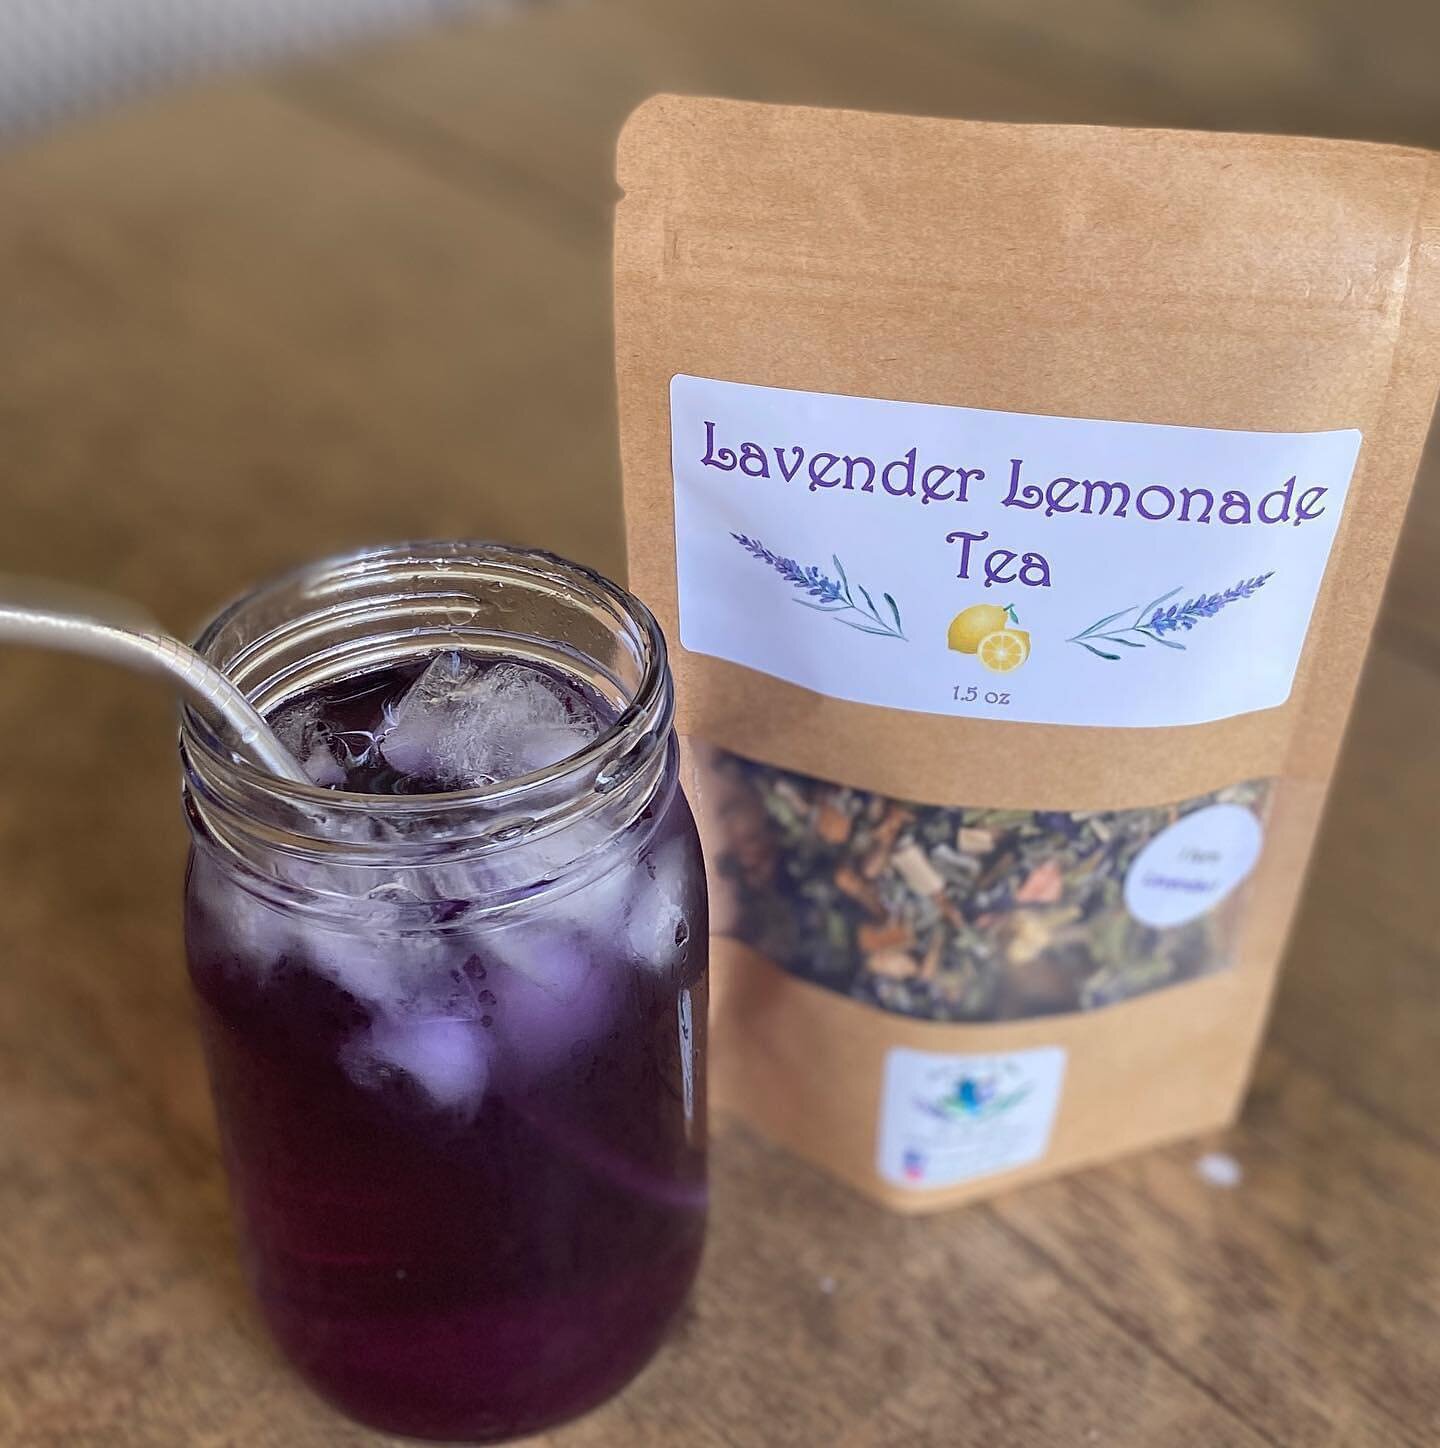 Stop in tomorrow for our 3rd Annual Mother&rsquo;s Day Bash&hellip;.. and try some Lavender Lemonade Tea! 🍋🍋🍋🍋

Great HOT or COLD @2c.herbs.gems.more will be serving up some samples.

Sunday 5/14 10am-2pm
Come stop by! 

Location: Tiverton Middle